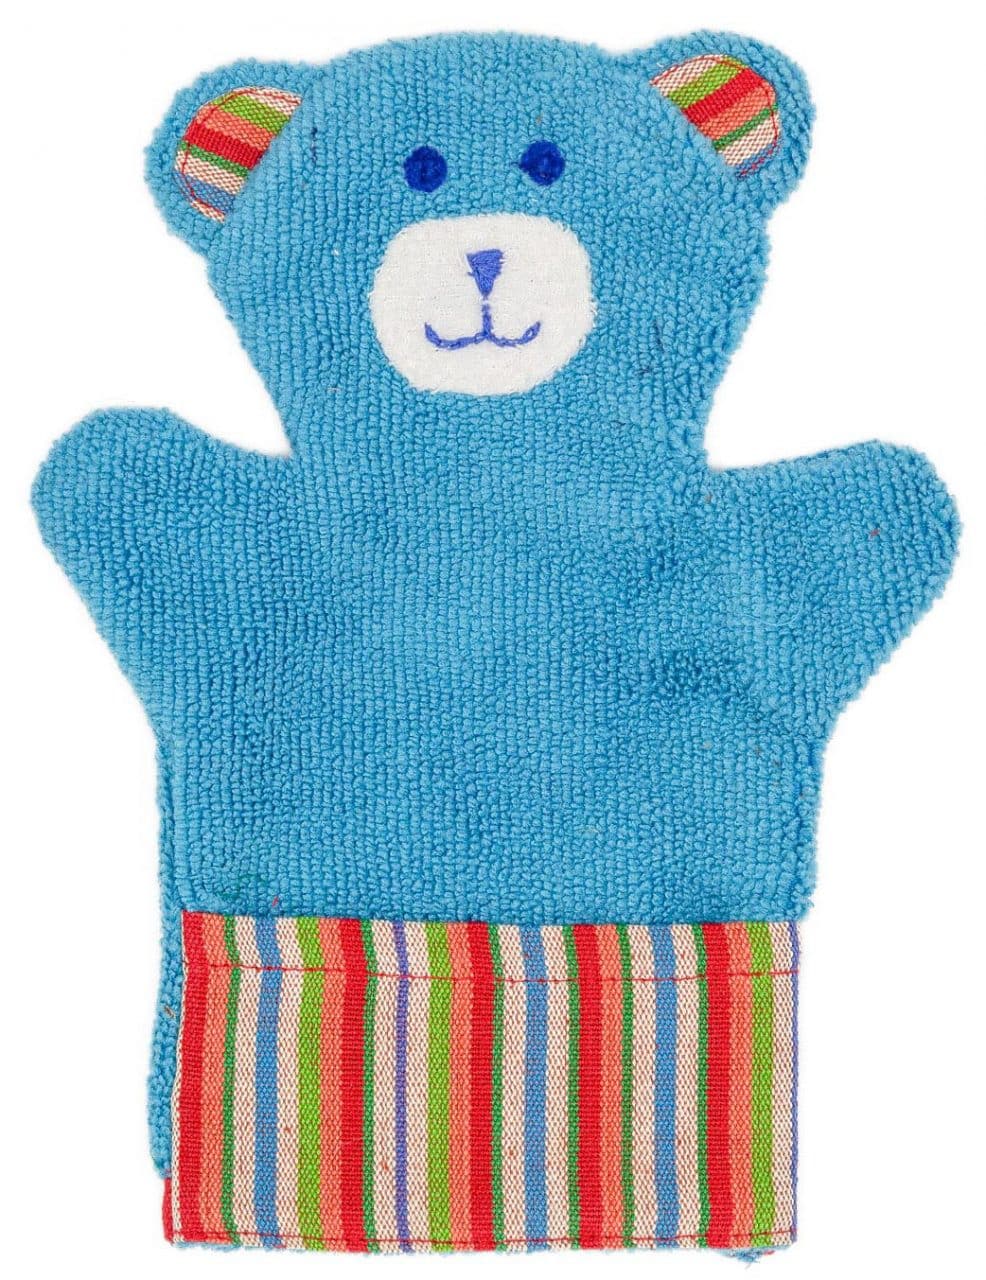 Puppet Washcloth - Bear - A Variety of Colors